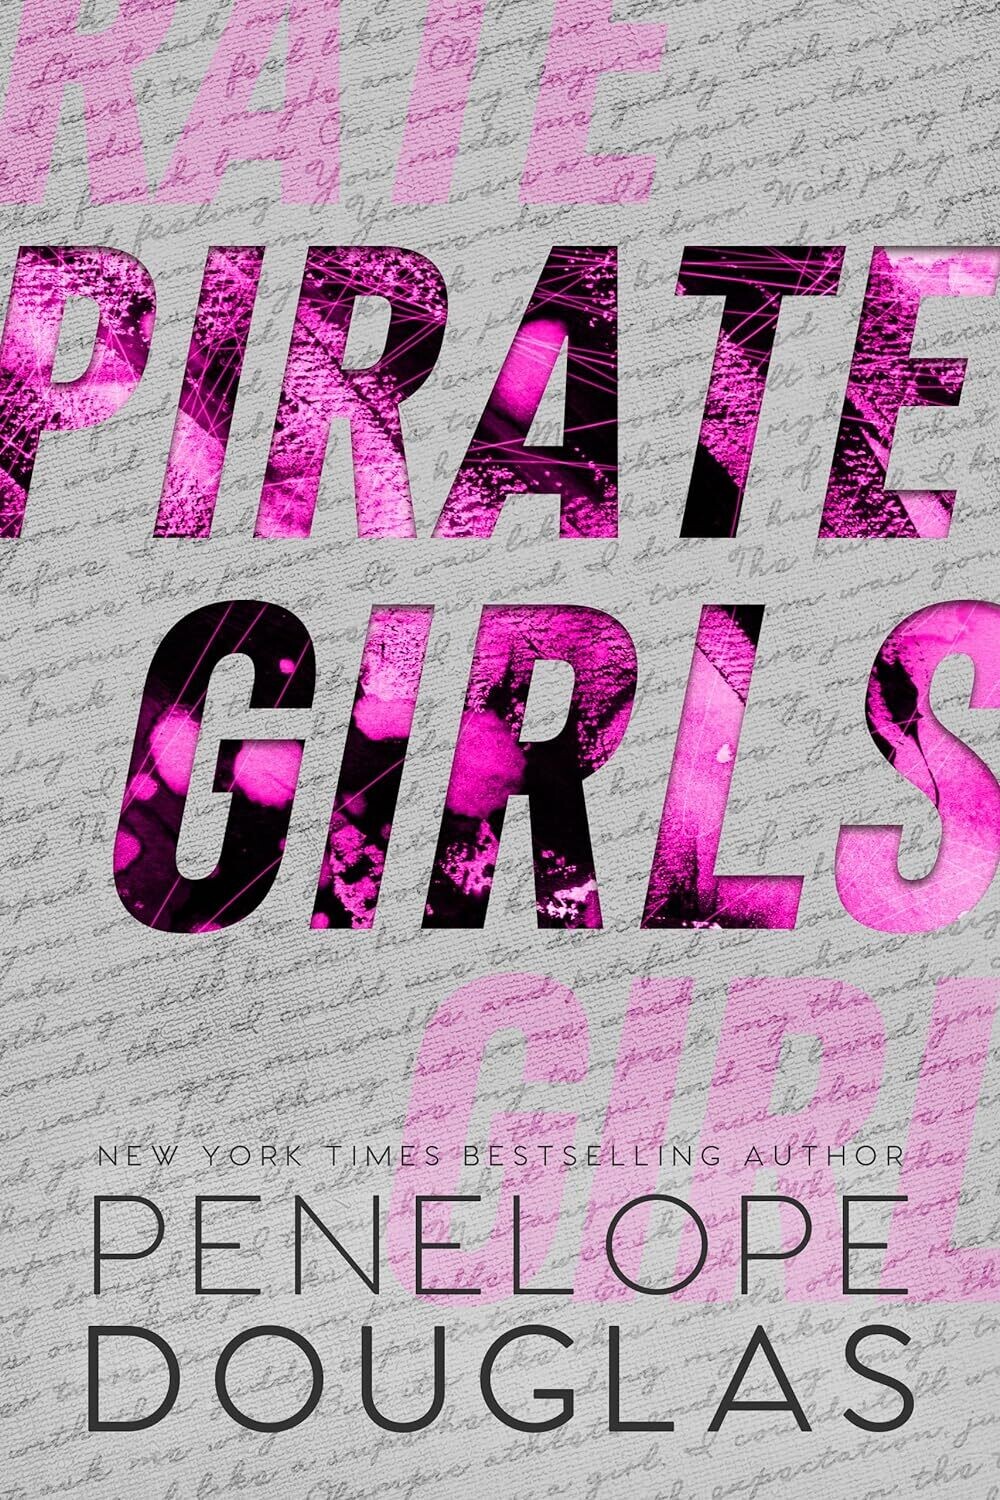 Pirate Girls Pre-Order
(STARTS SHIPPING 4-24 See Notes)